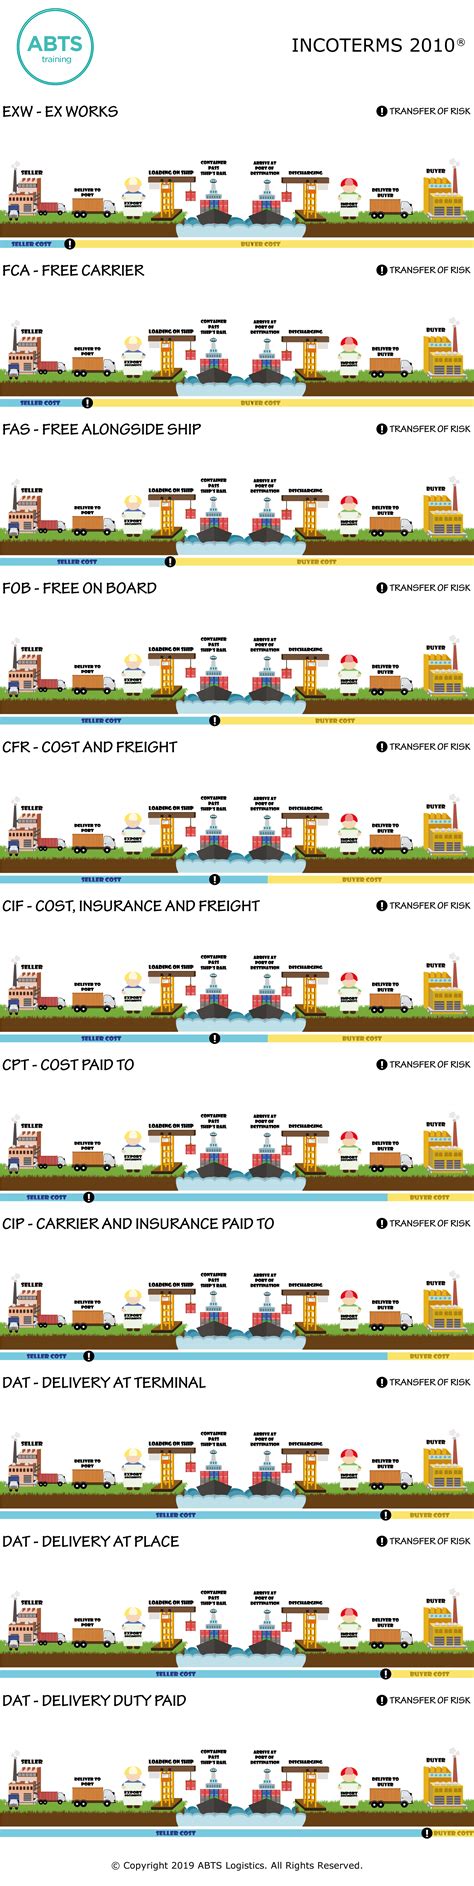 What Are Incoterms And How Are They Used Think Code Words